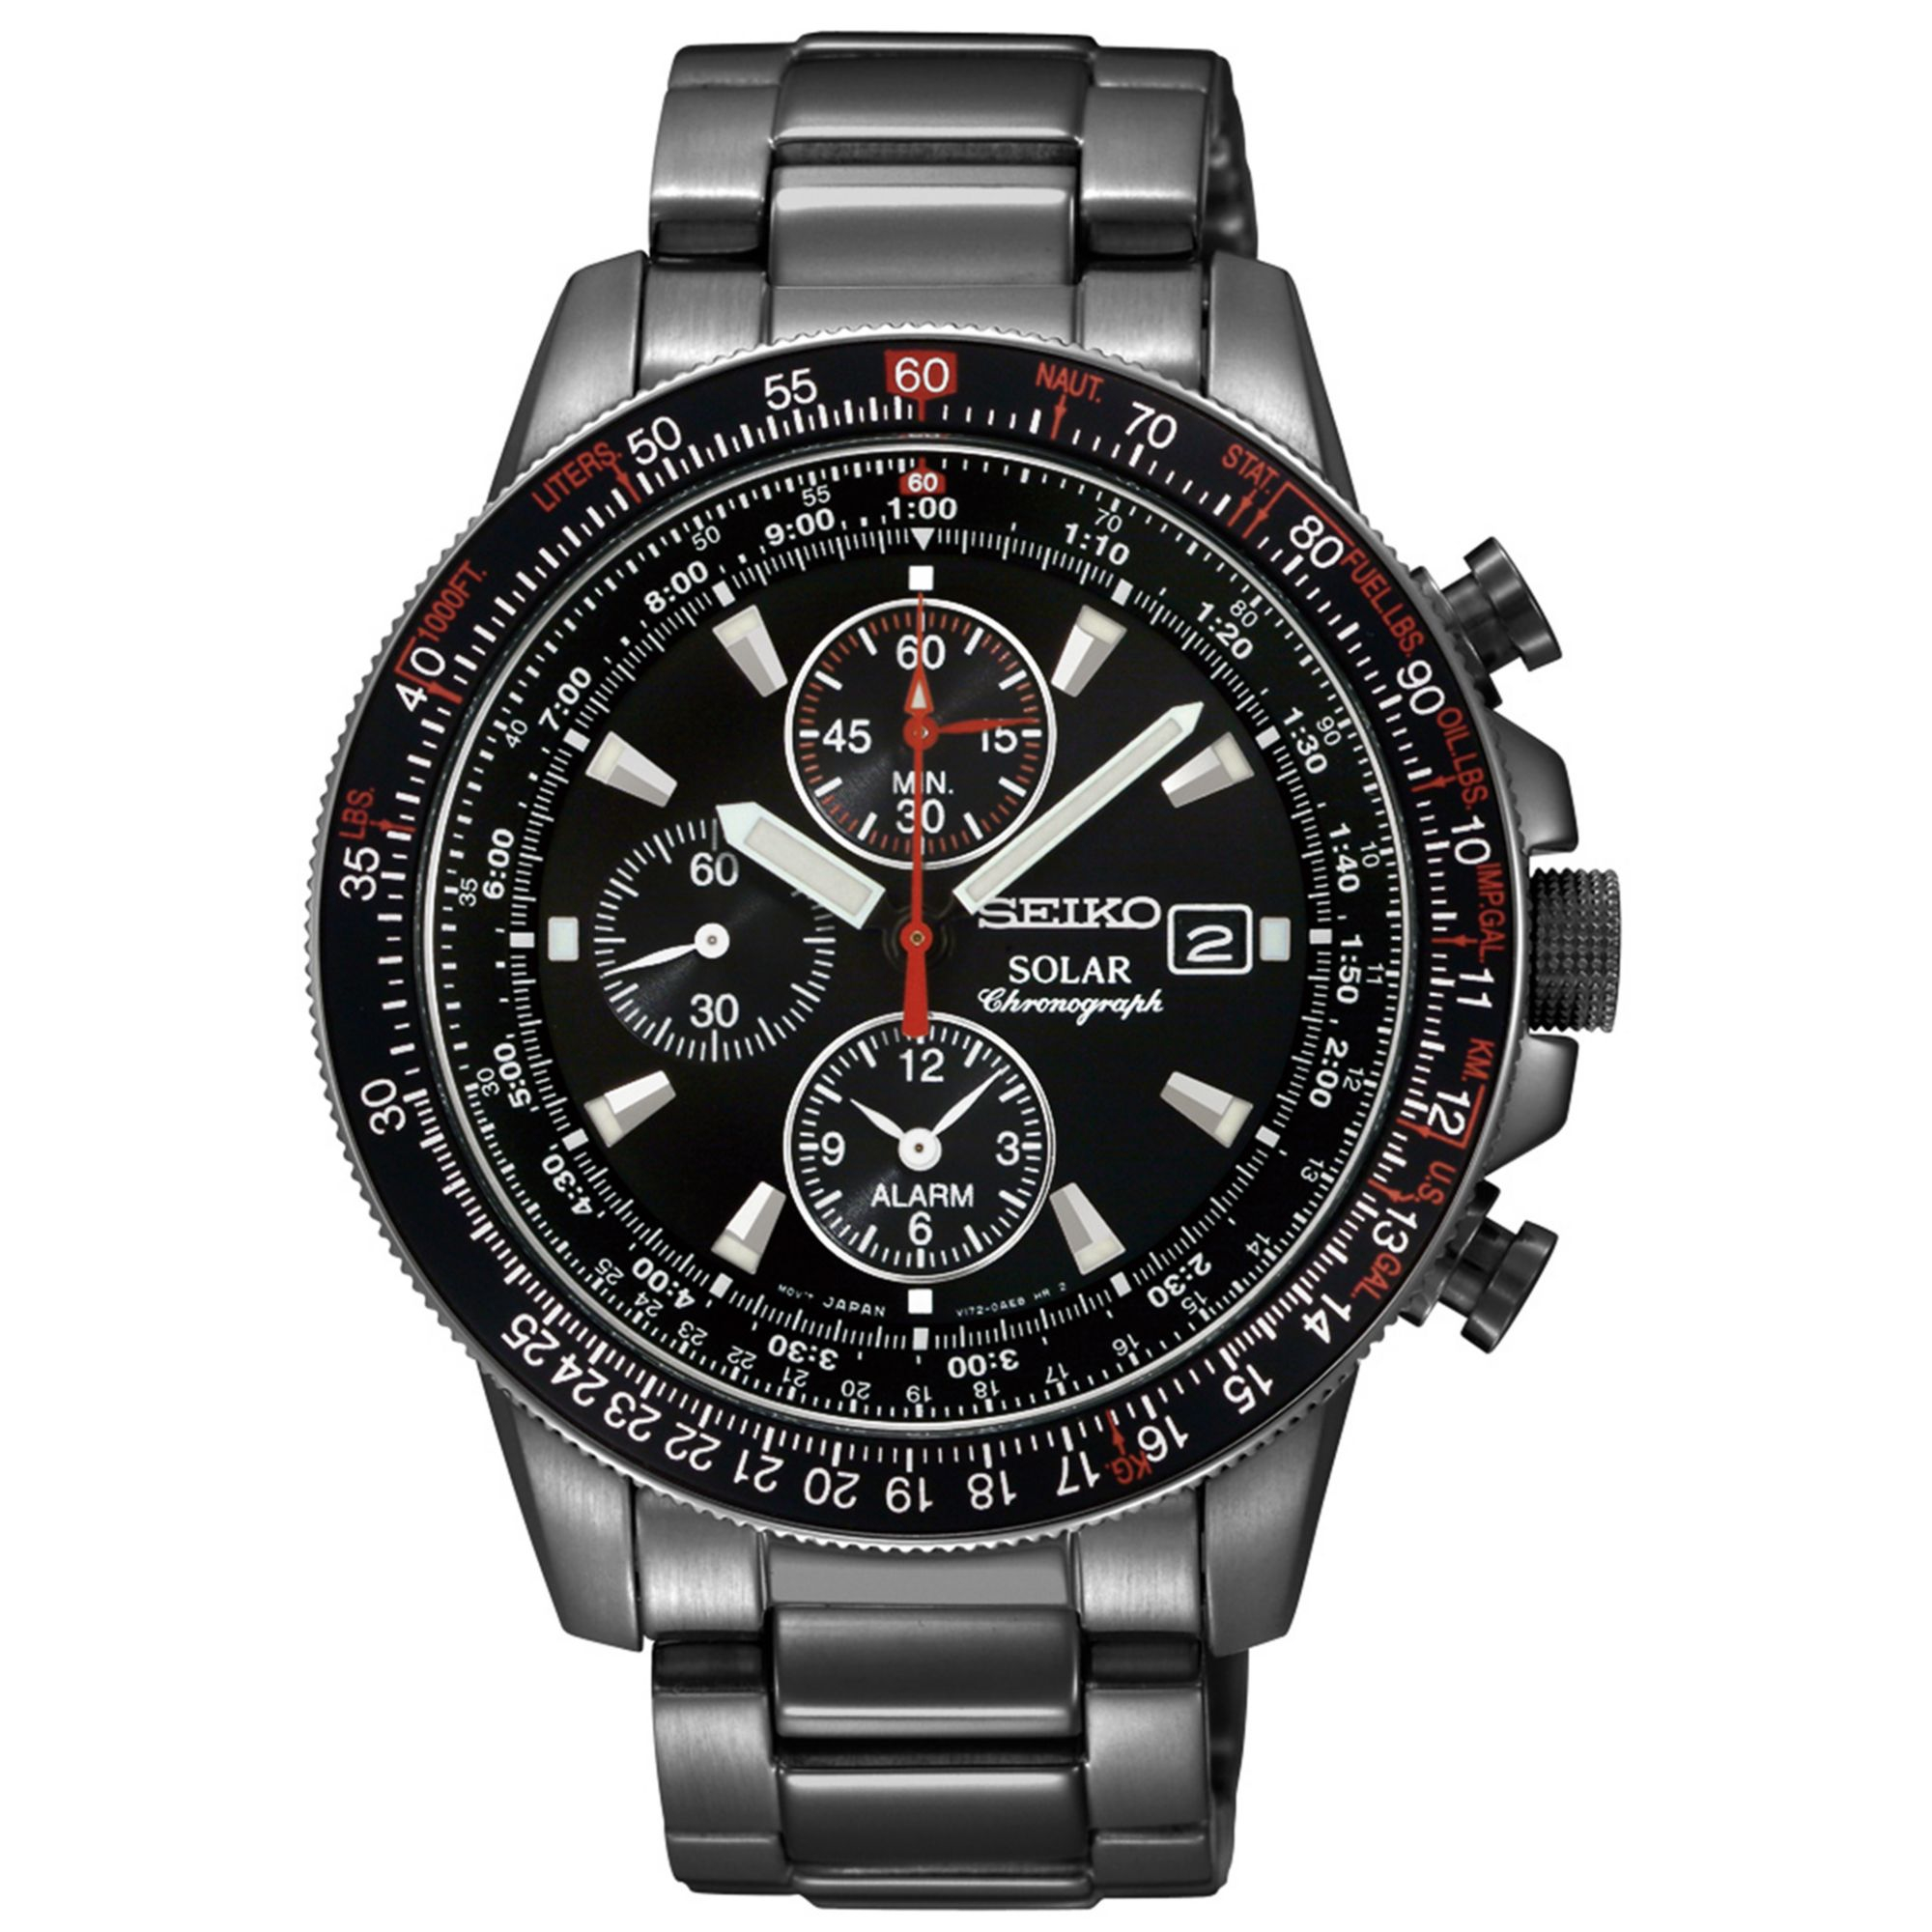 Persona mel sagtmodighed Seiko Mens Chronograph Solar Aviator Black Ionfinished Stainless Steel  Bracelet Watch 43mm Ssc145 for Men | Lyst